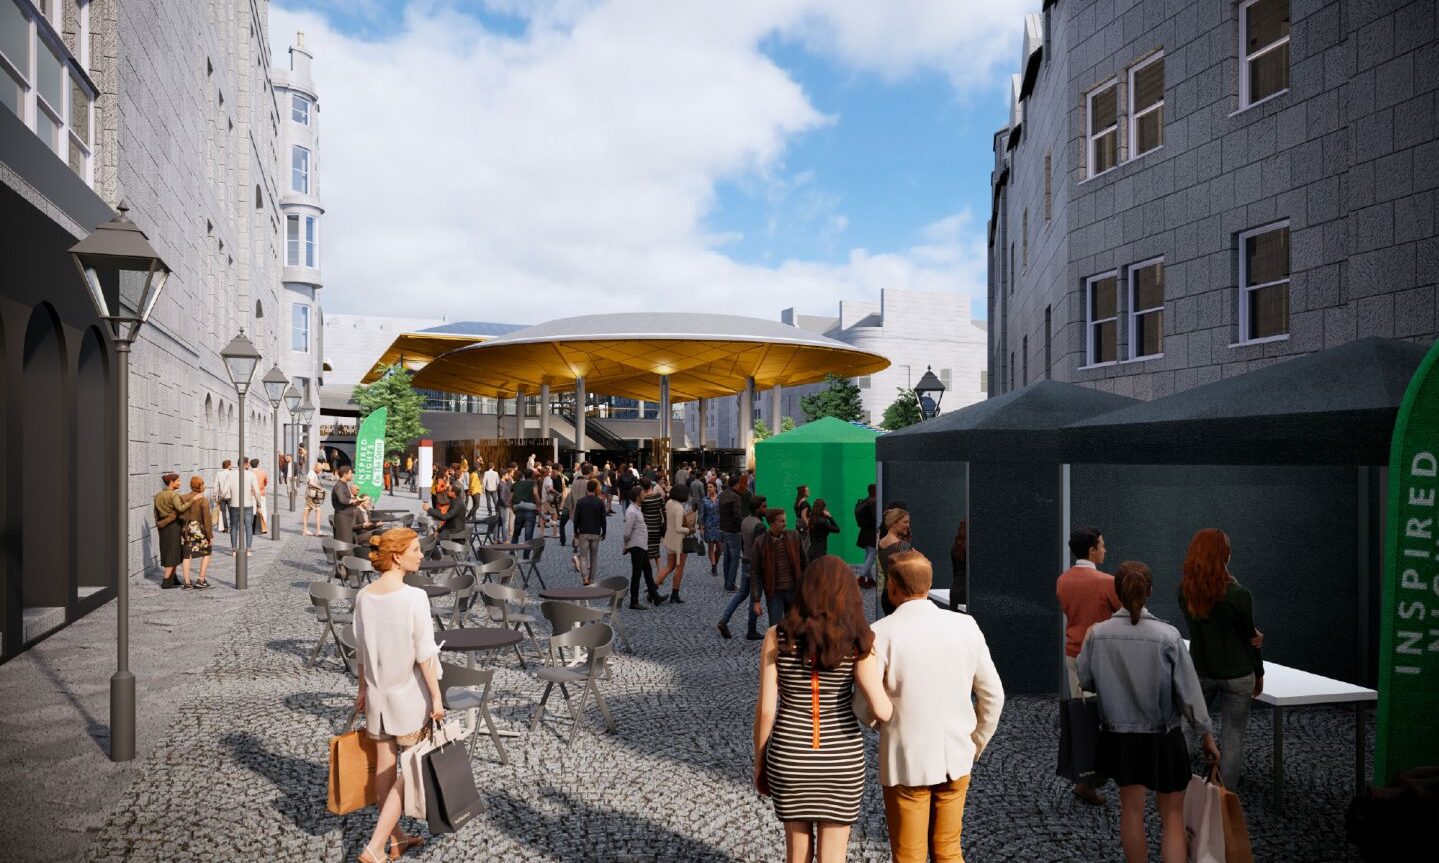 The council's plans for a £150 million city centre and beach masterplan refresh will form part of the review.